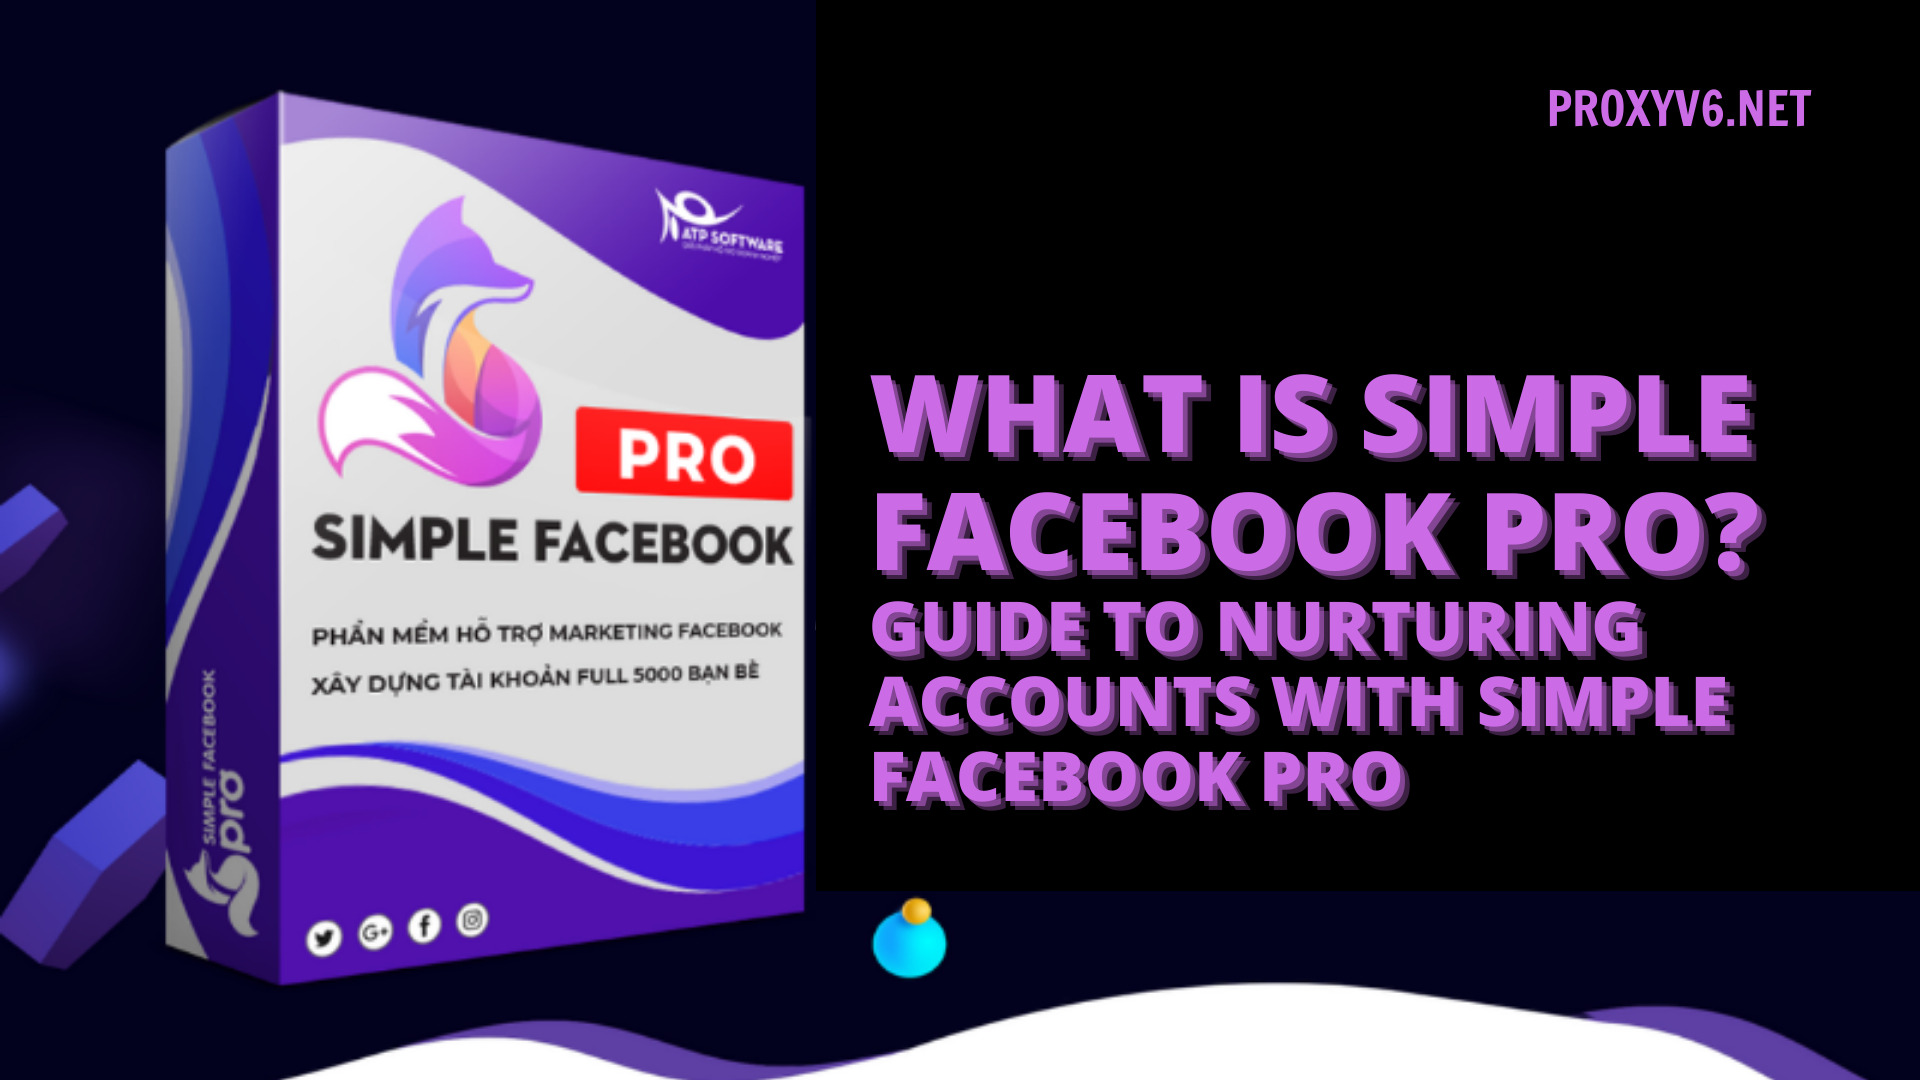 What is Simple Facebook Pro? Guide to nurturing accounts with Simple Facebook Pro